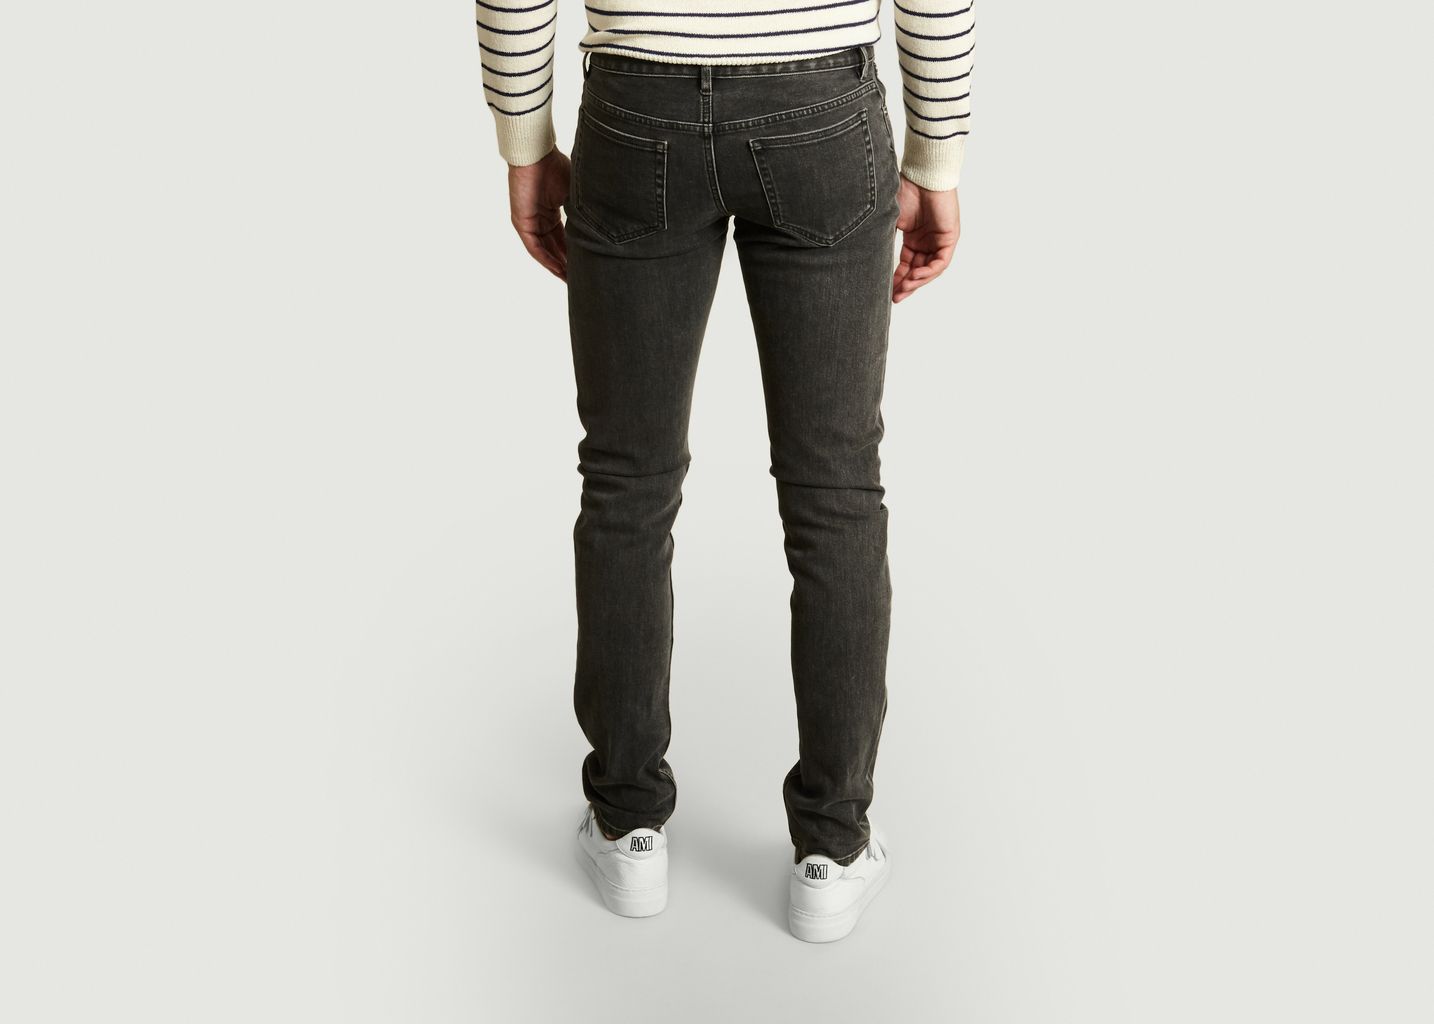 New Standard Jeans - A.P.C.